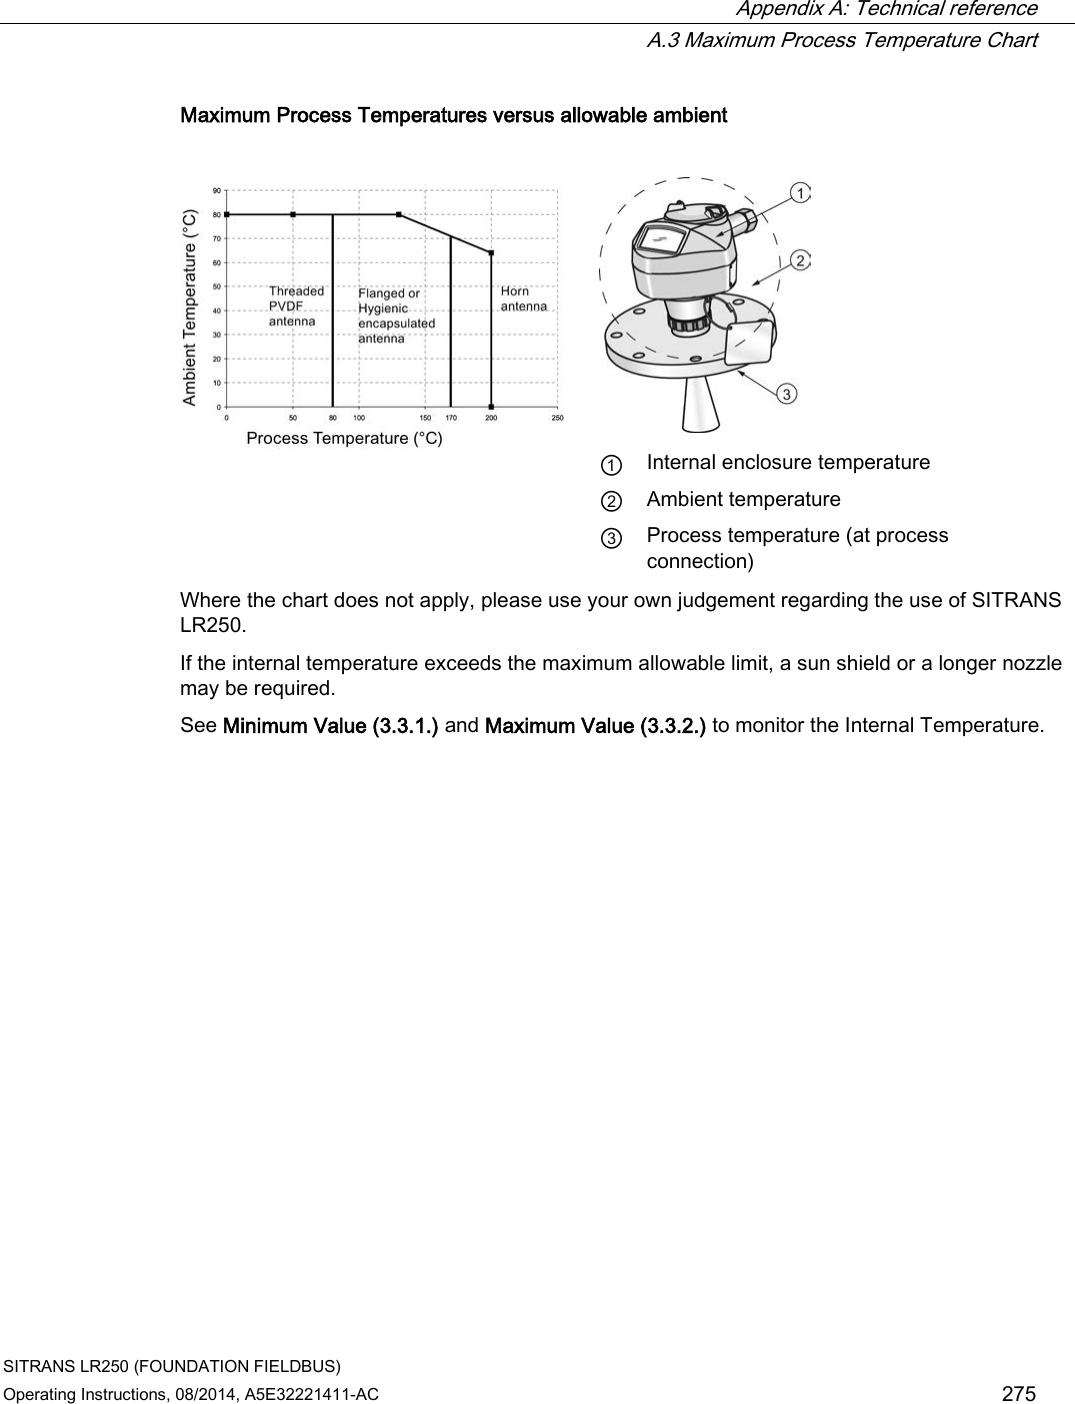  Appendix A: Technical reference  A.3 Maximum Process Temperature Chart SITRANS LR250 (FOUNDATION FIELDBUS) Operating Instructions, 08/2014, A5E32221411-AC 275 Maximum Process Temperatures versus allowable ambient    ① Internal enclosure temperature ② Ambient temperature ③ Process temperature (at process connection) Where the chart does not apply, please use your own judgement regarding the use of SITRANS LR250. If the internal temperature exceeds the maximum allowable limit, a sun shield or a longer nozzle may be required. See Minimum Value (3.3.1.) and Maximum Value (3.3.2.) to monitor the Internal Temperature. 